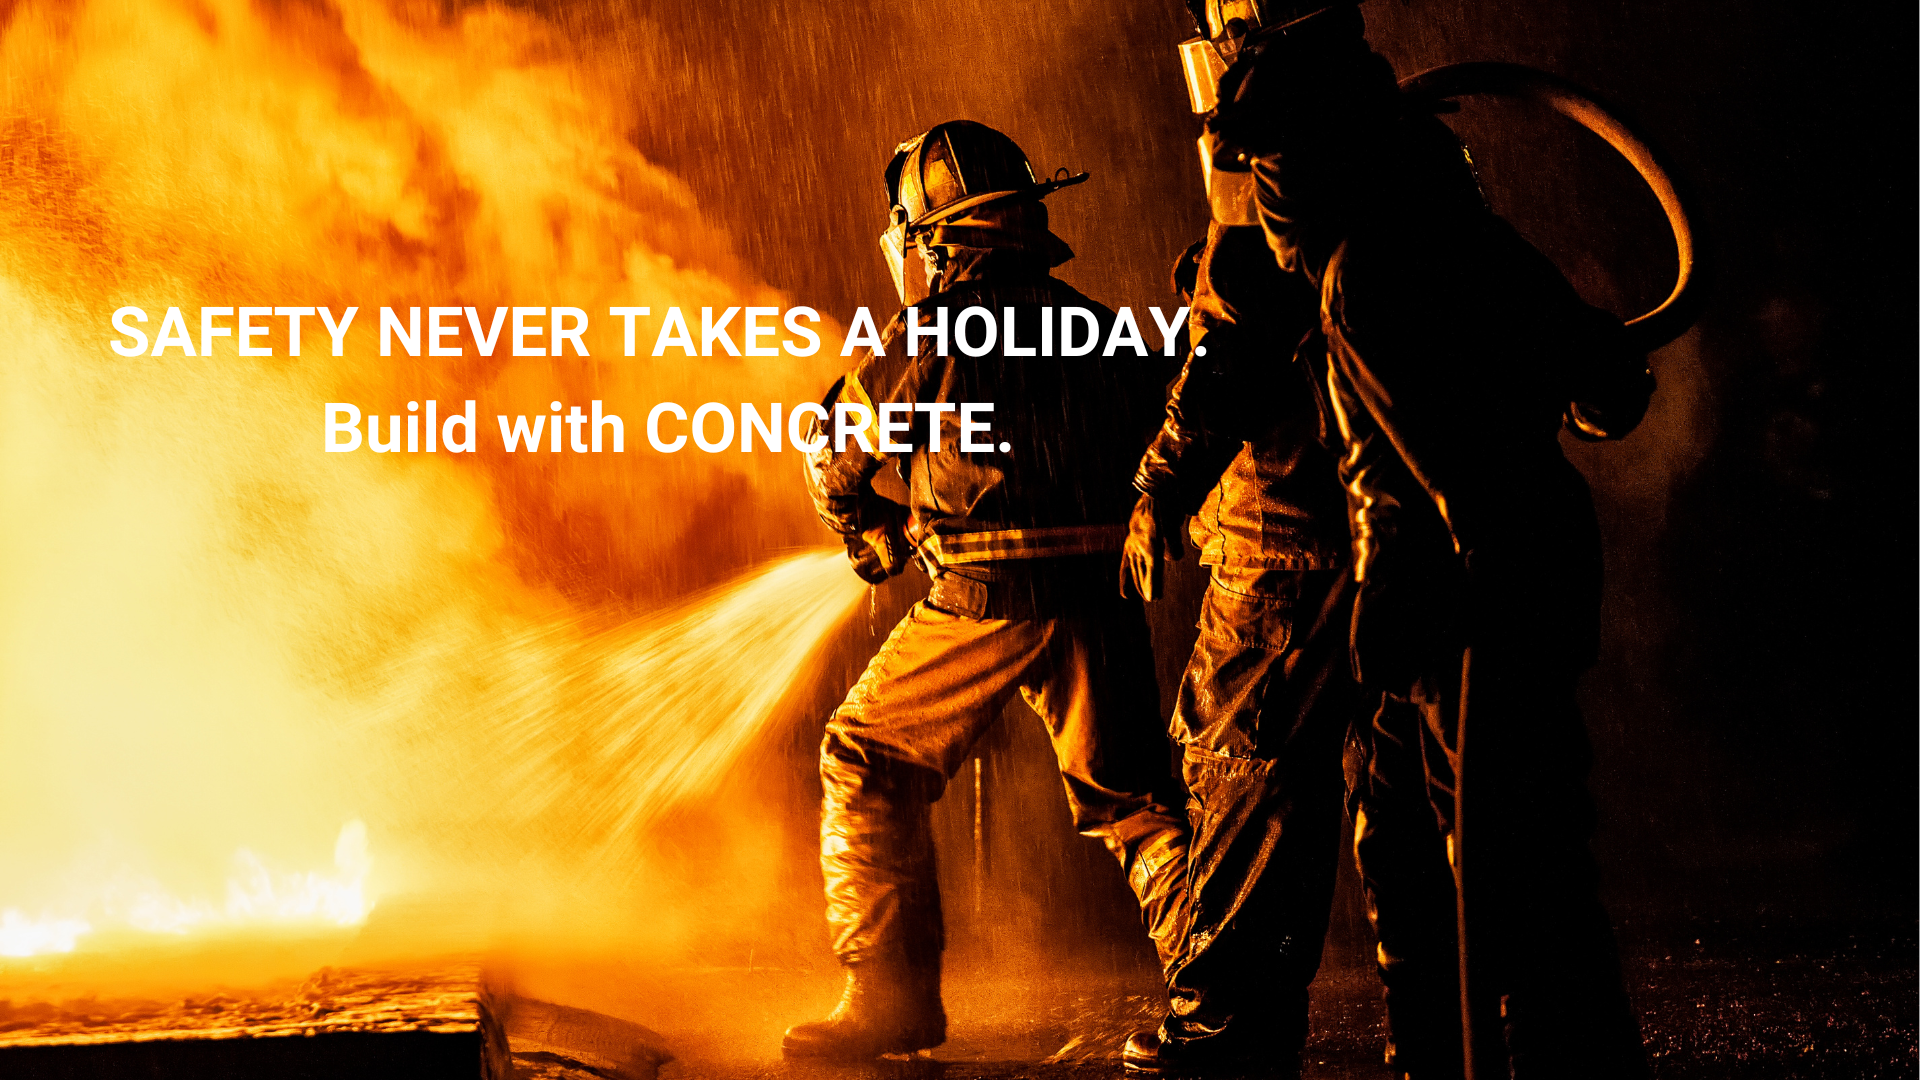 Safety Never Takes A Holiday. Build with Concrete.